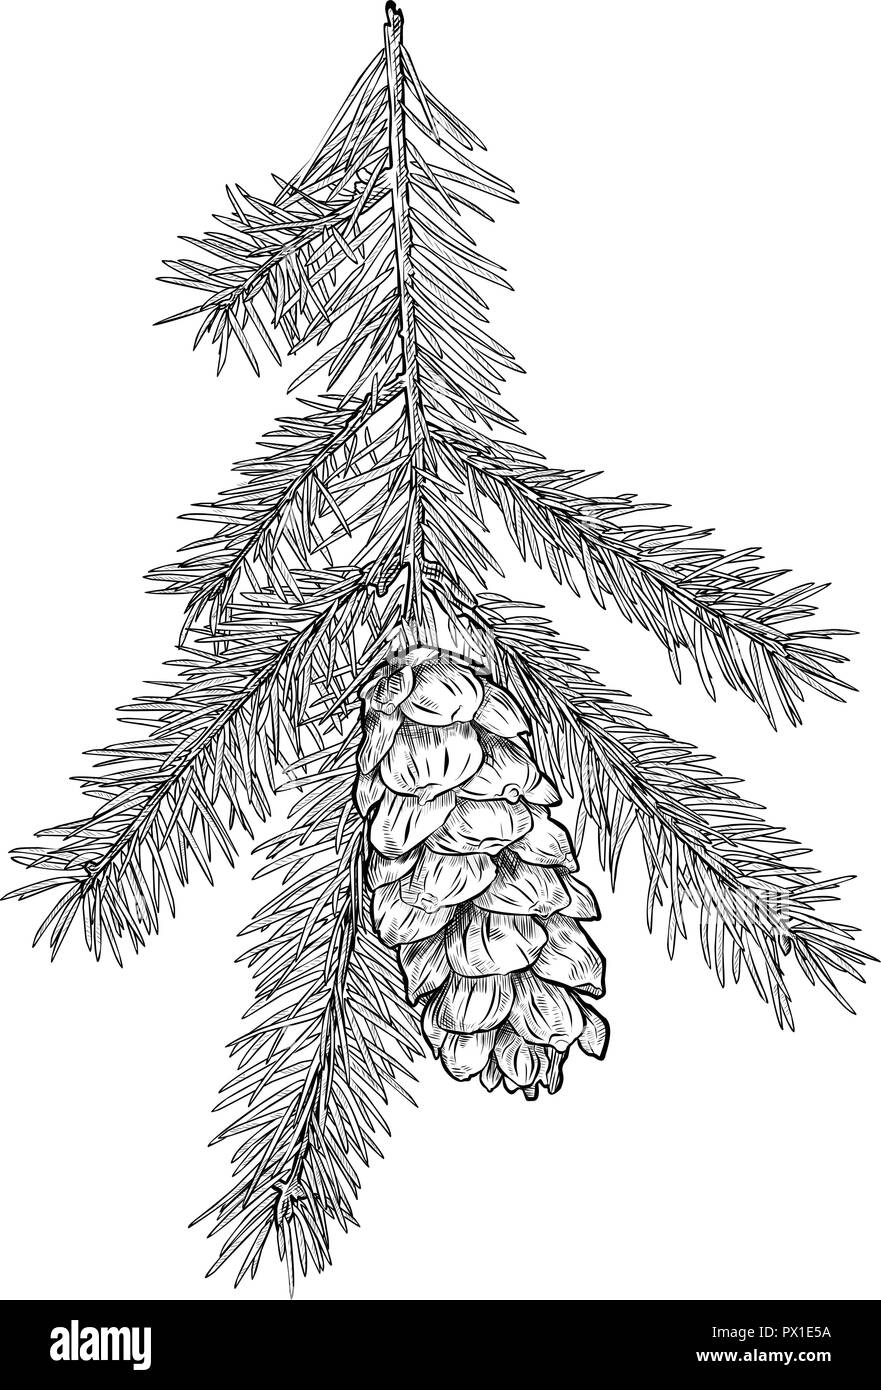 Hand drawn Fir tree branch with cone isolated on white background. Stock Vector